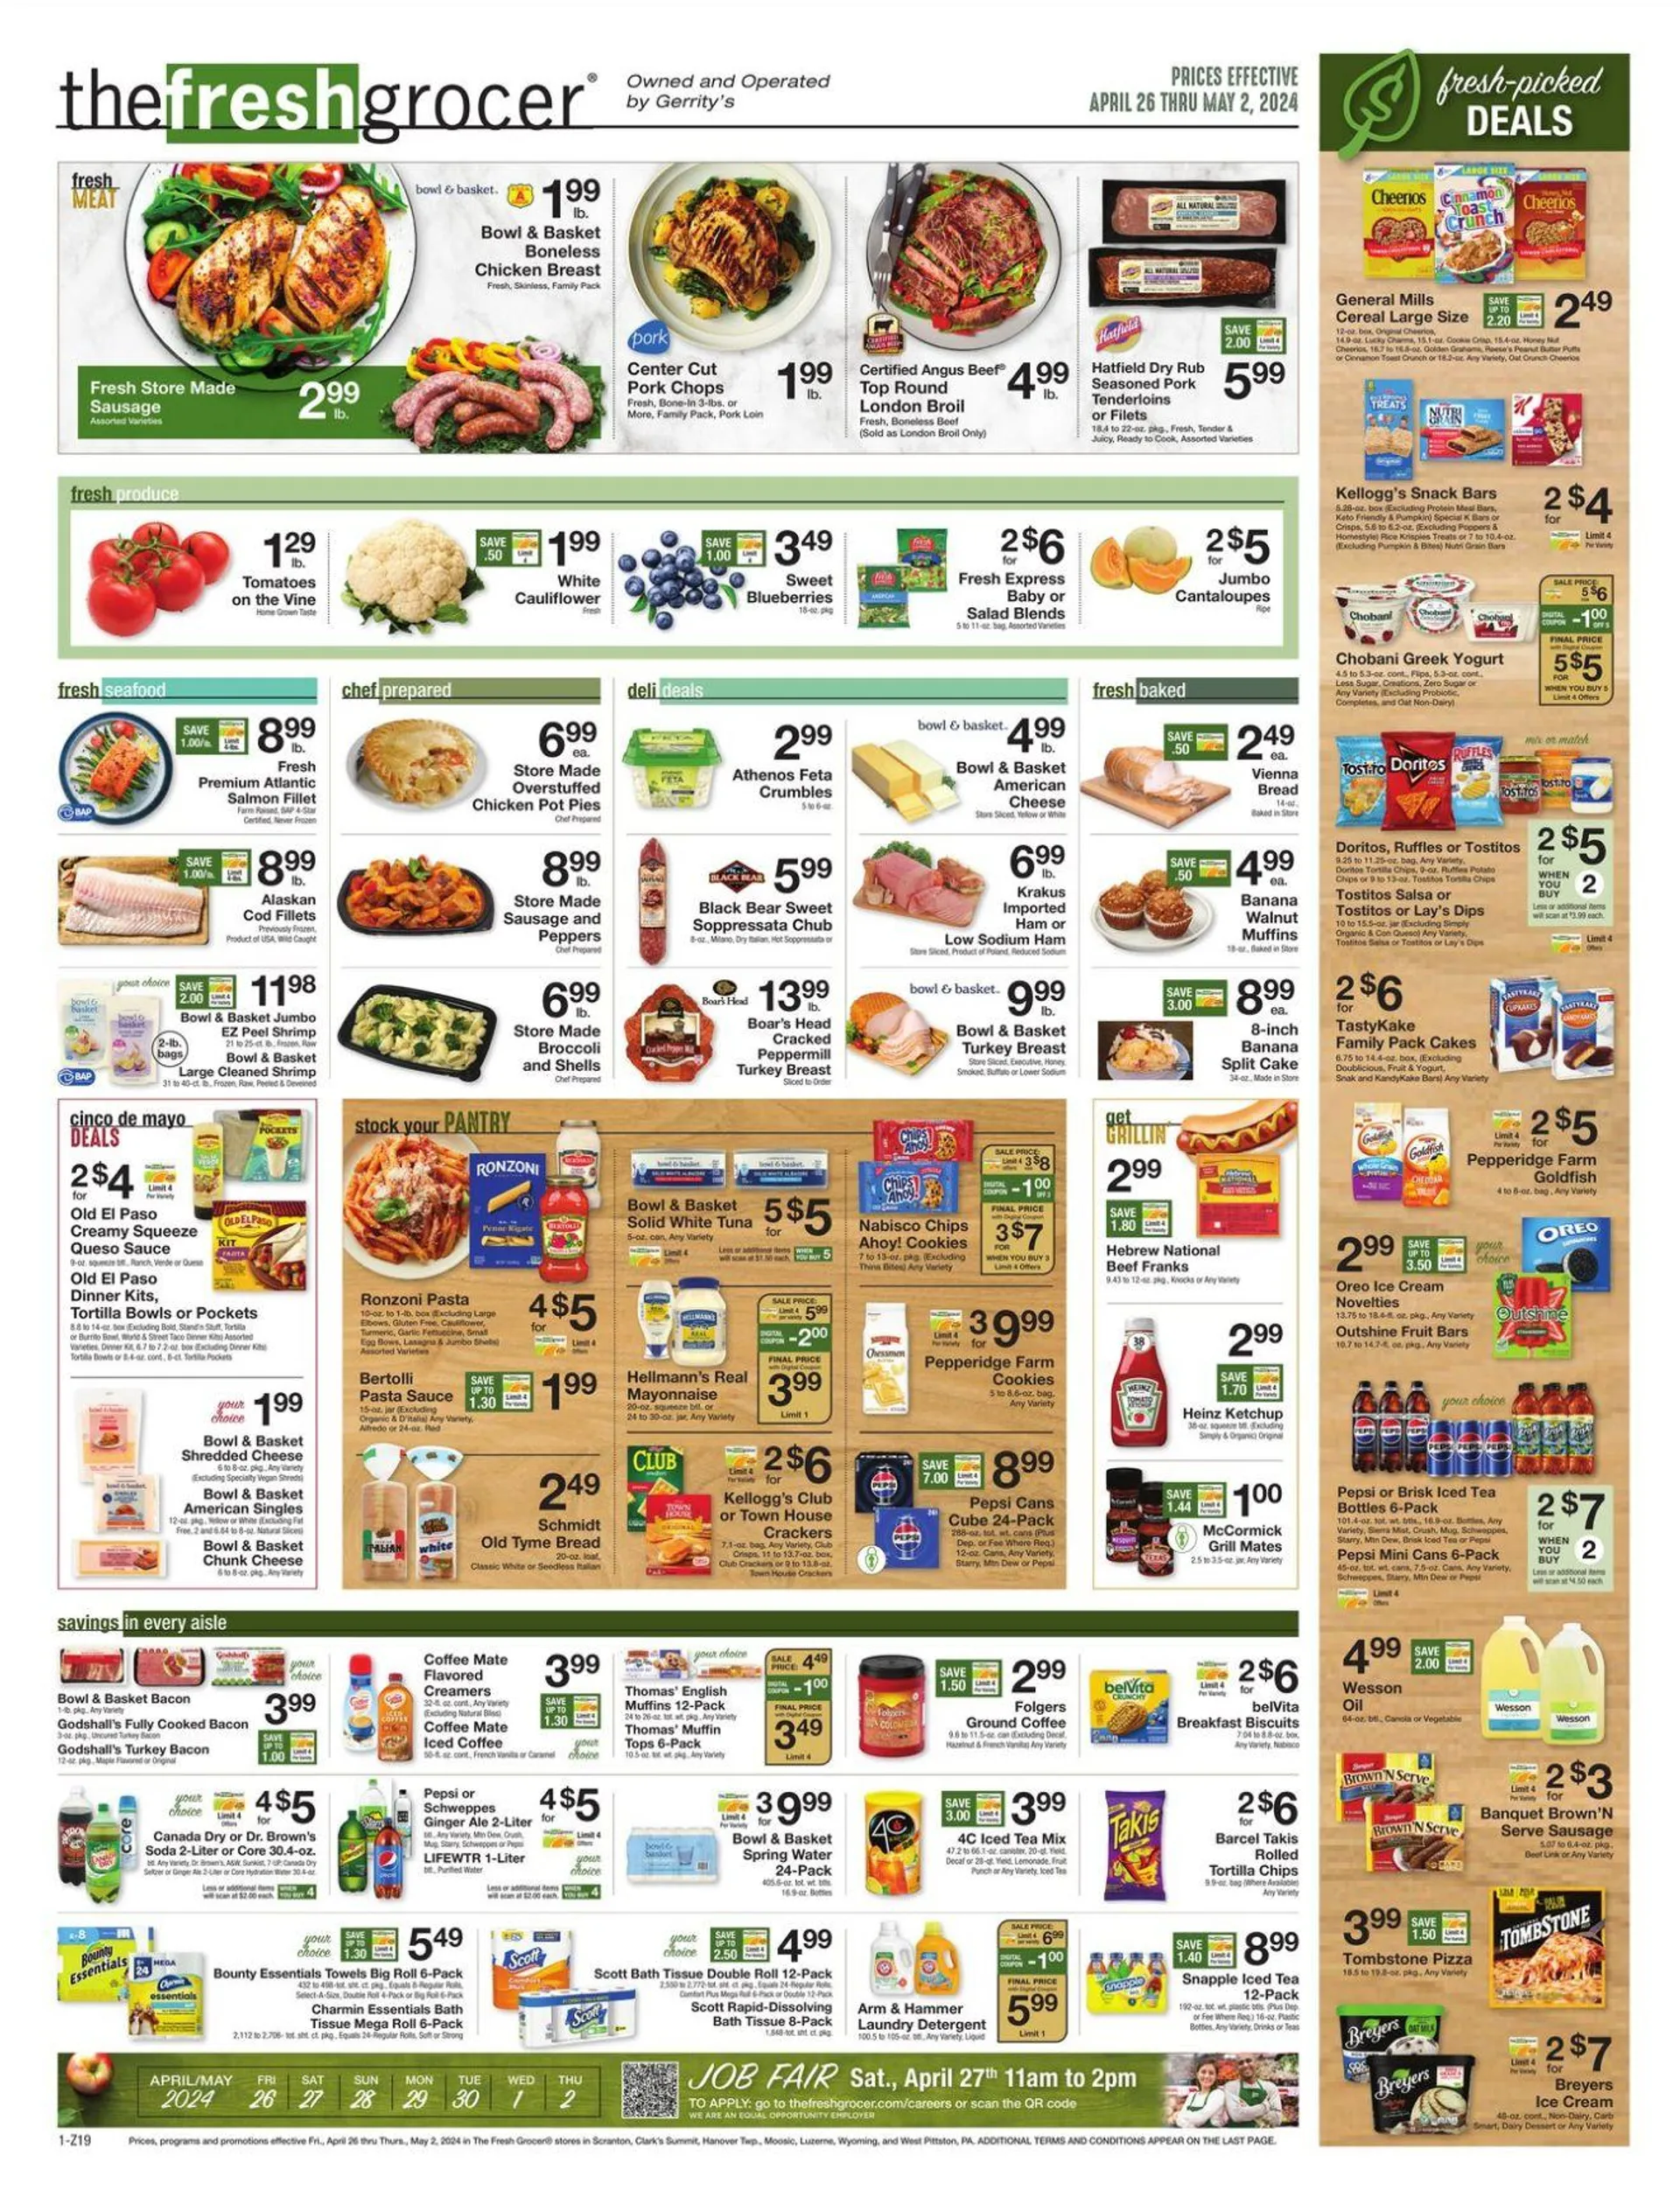 Gerritys Supermarkets Current weekly ad - 1